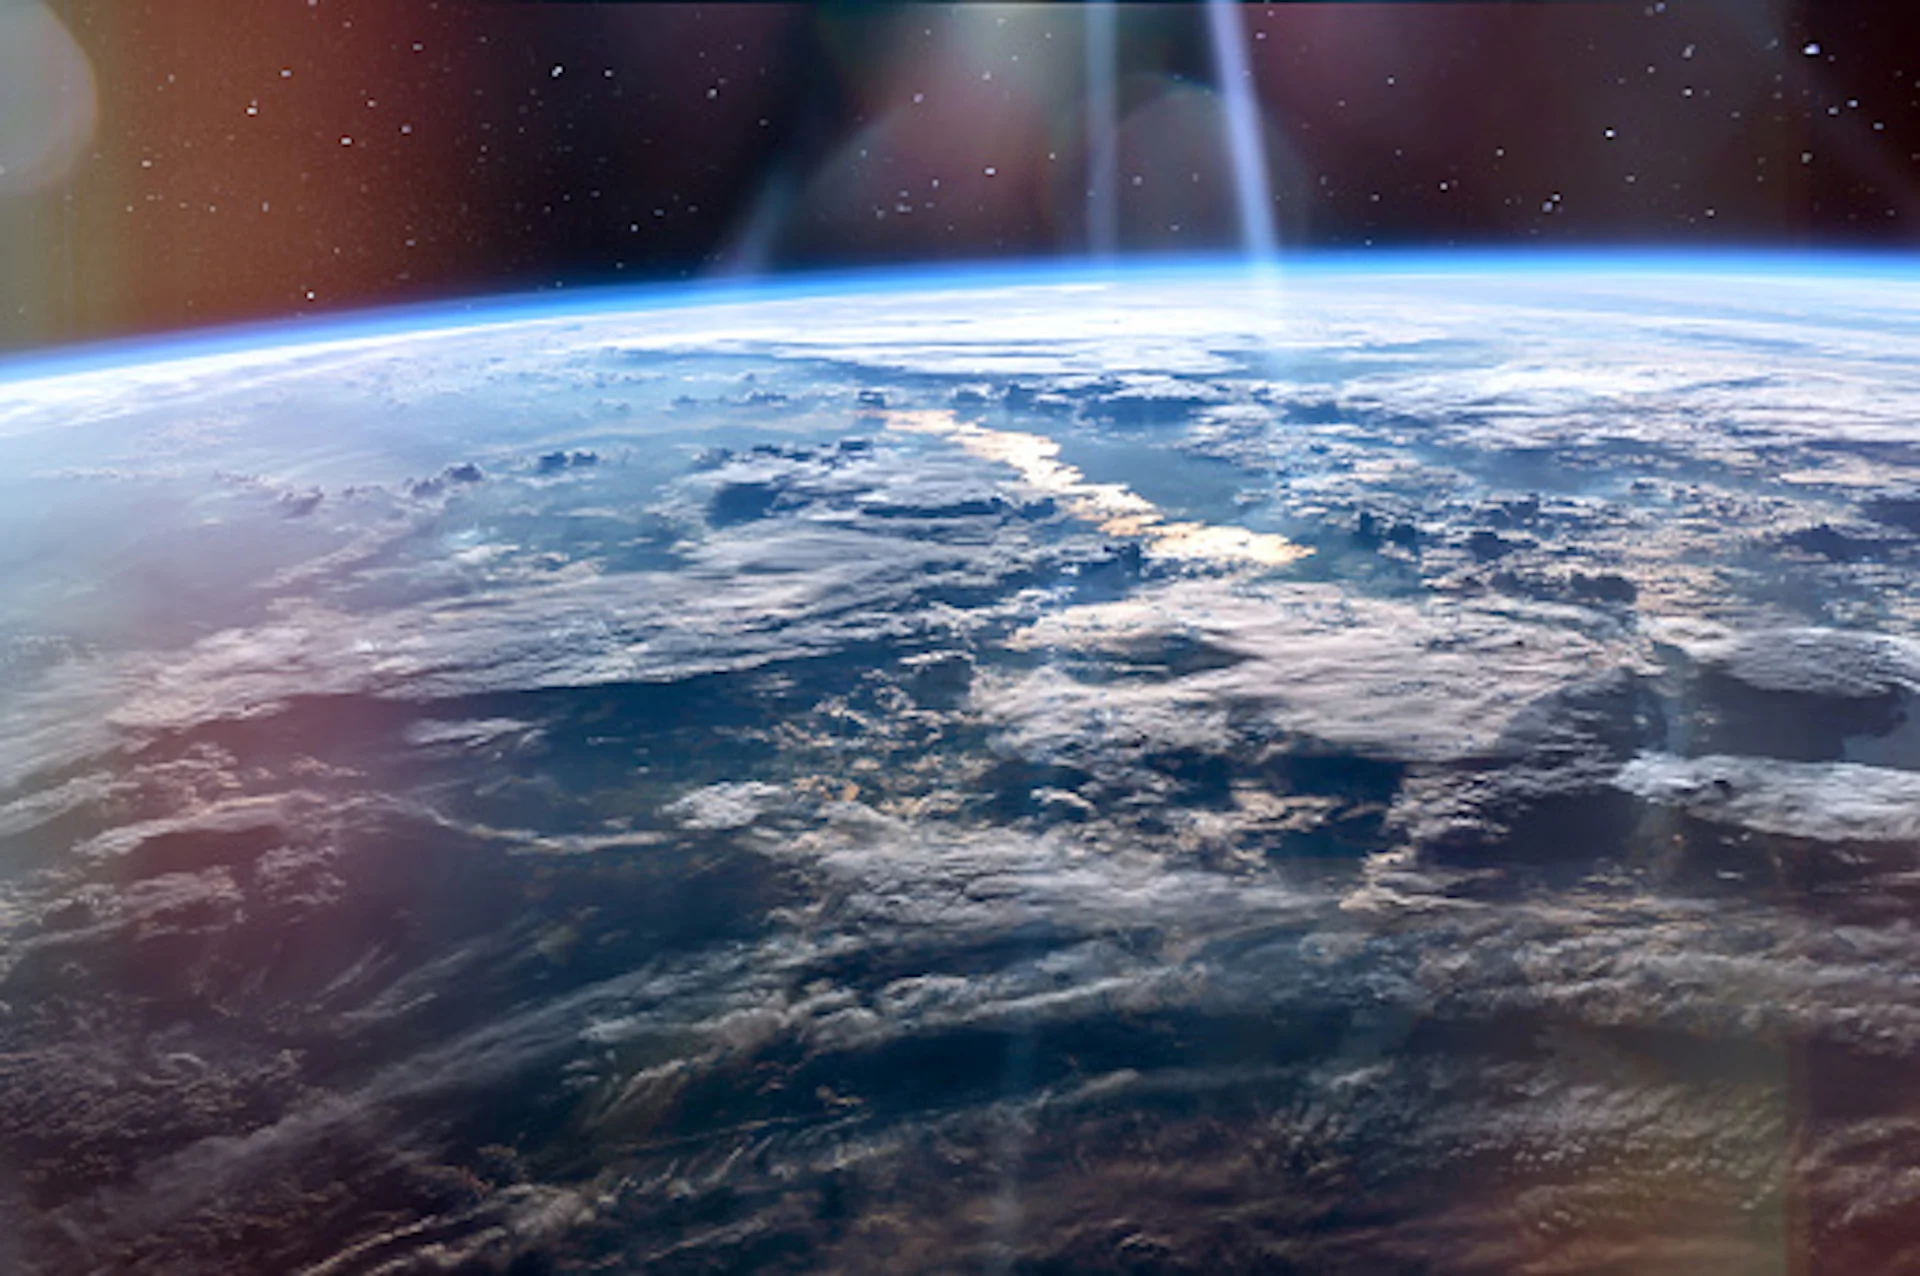 Is hacking the atmosphere a 'cool' idea to offset global warming?